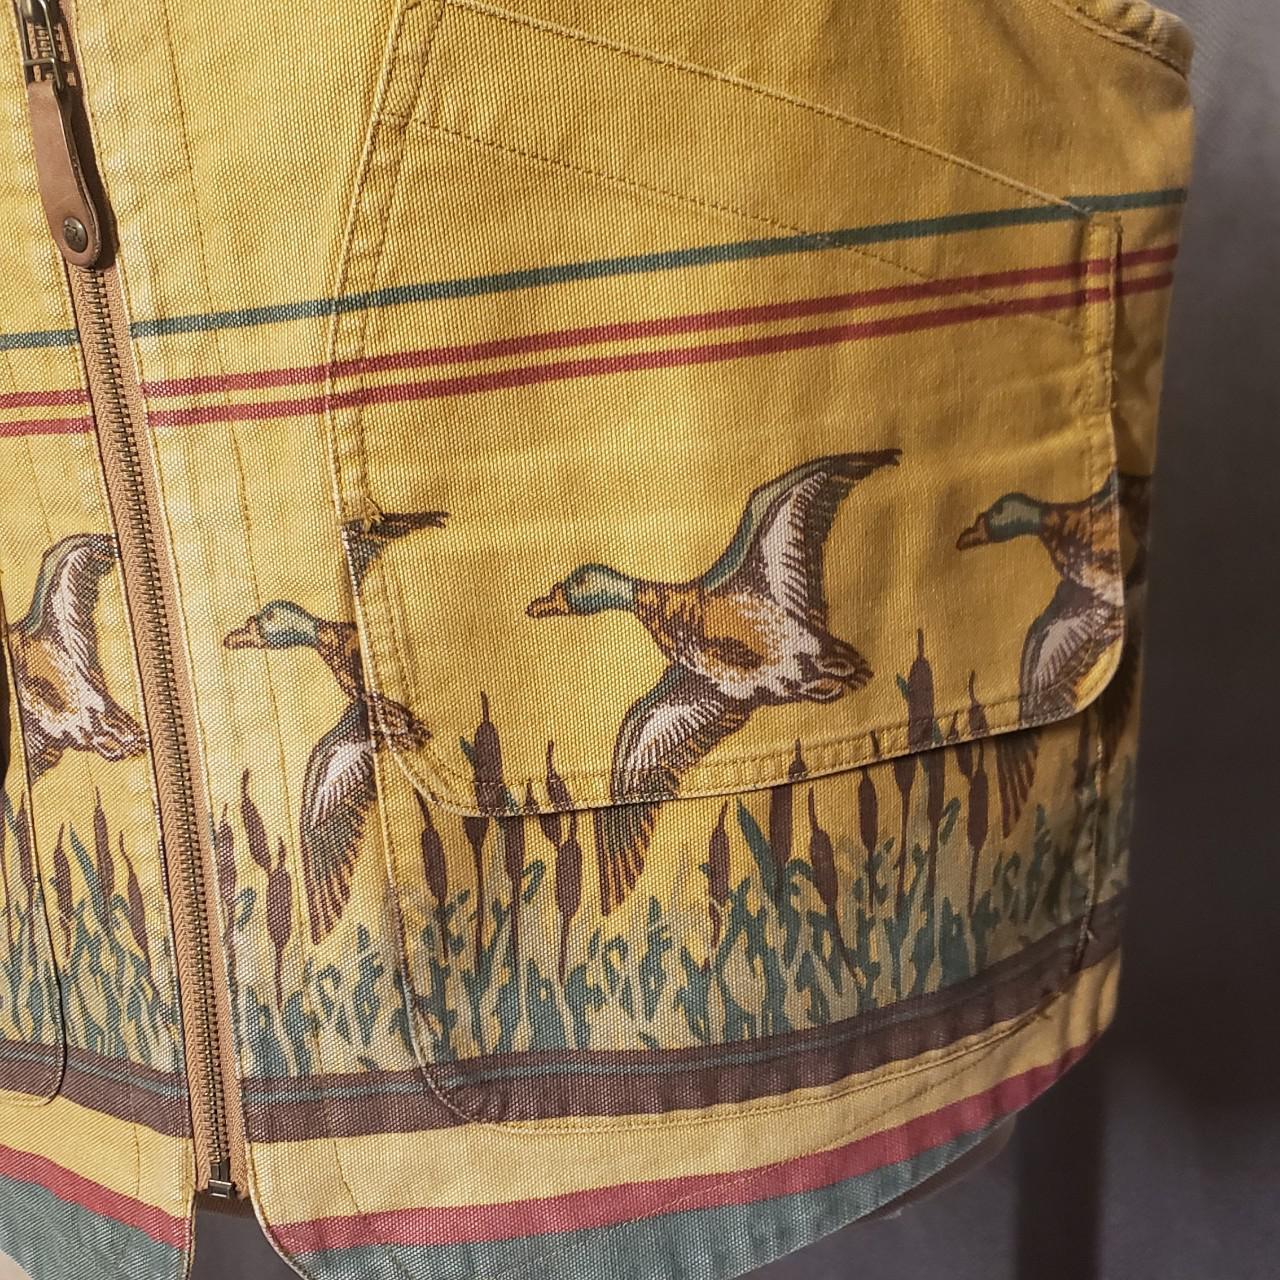 Product Image 2 - Banana Republic duck hunting vest
Size